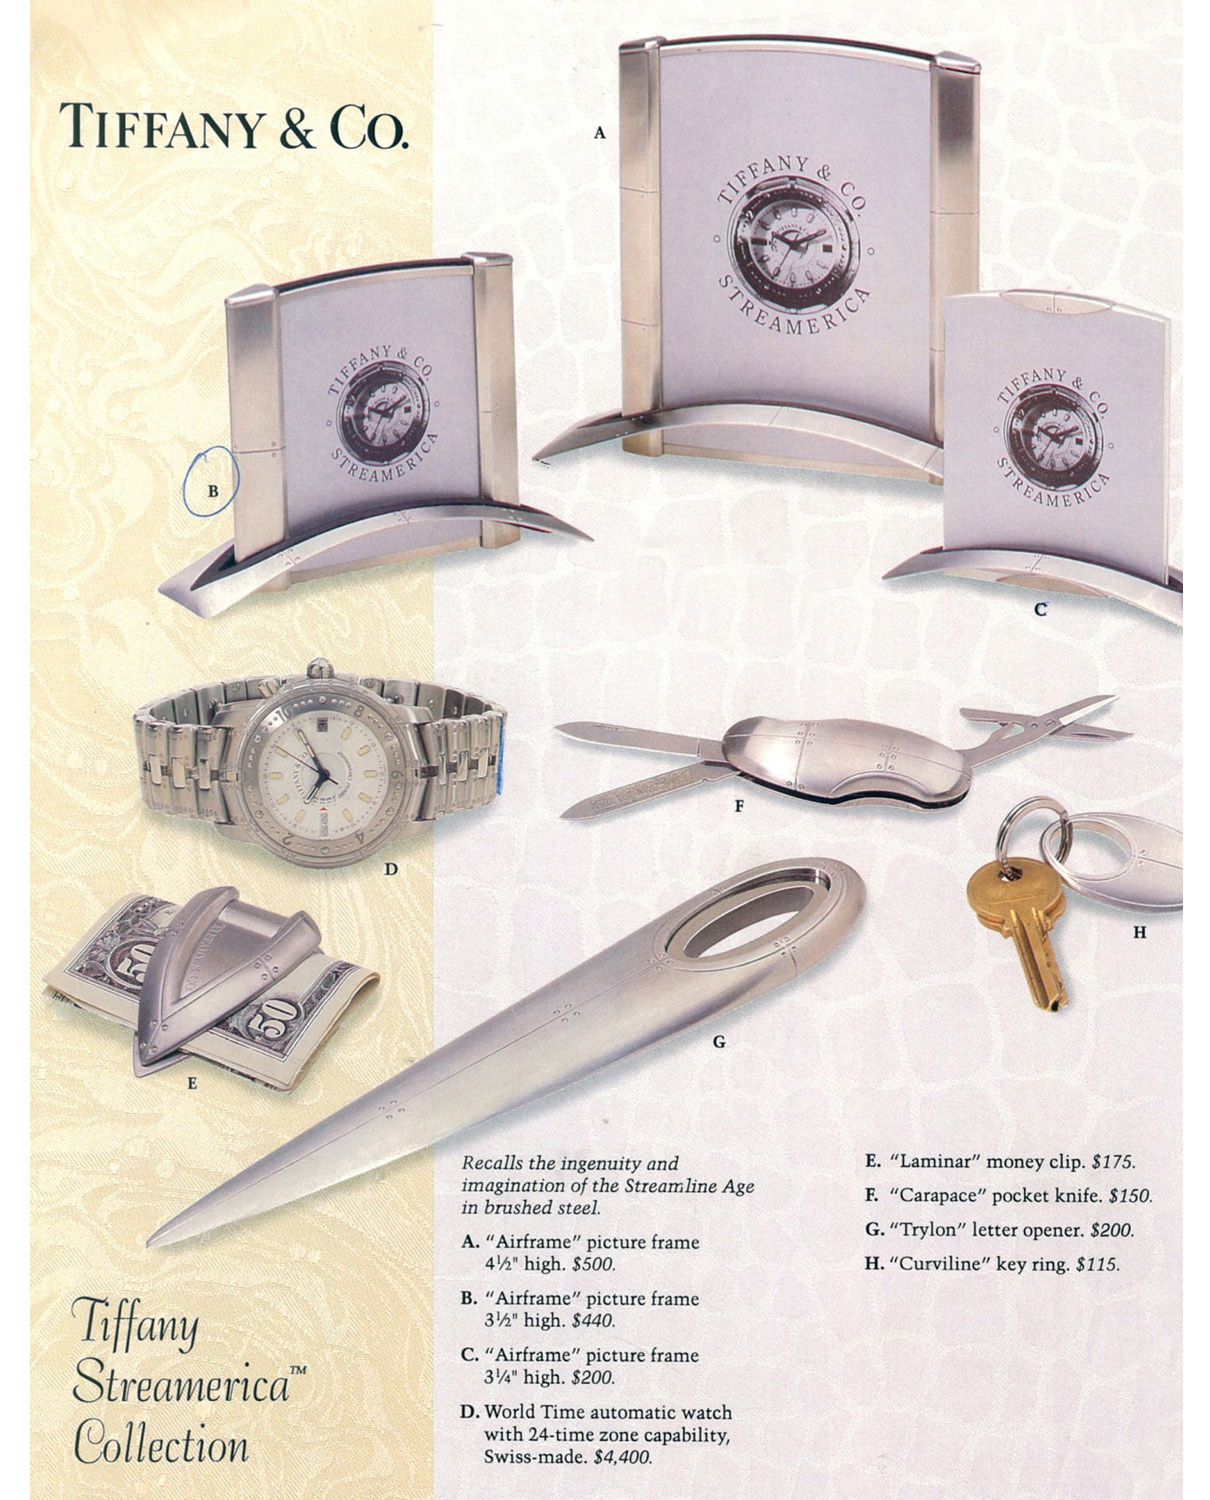 Yamrun jewelers Tiffany Streamerica Collection 1993 Stainless Steel Airframe Picture Frames World Time Automatic Watch Carapace Pocket Knife Laminar Money Clip, Trylon Letter Opener, and Curviline Key Ring, all with 1993 prices.